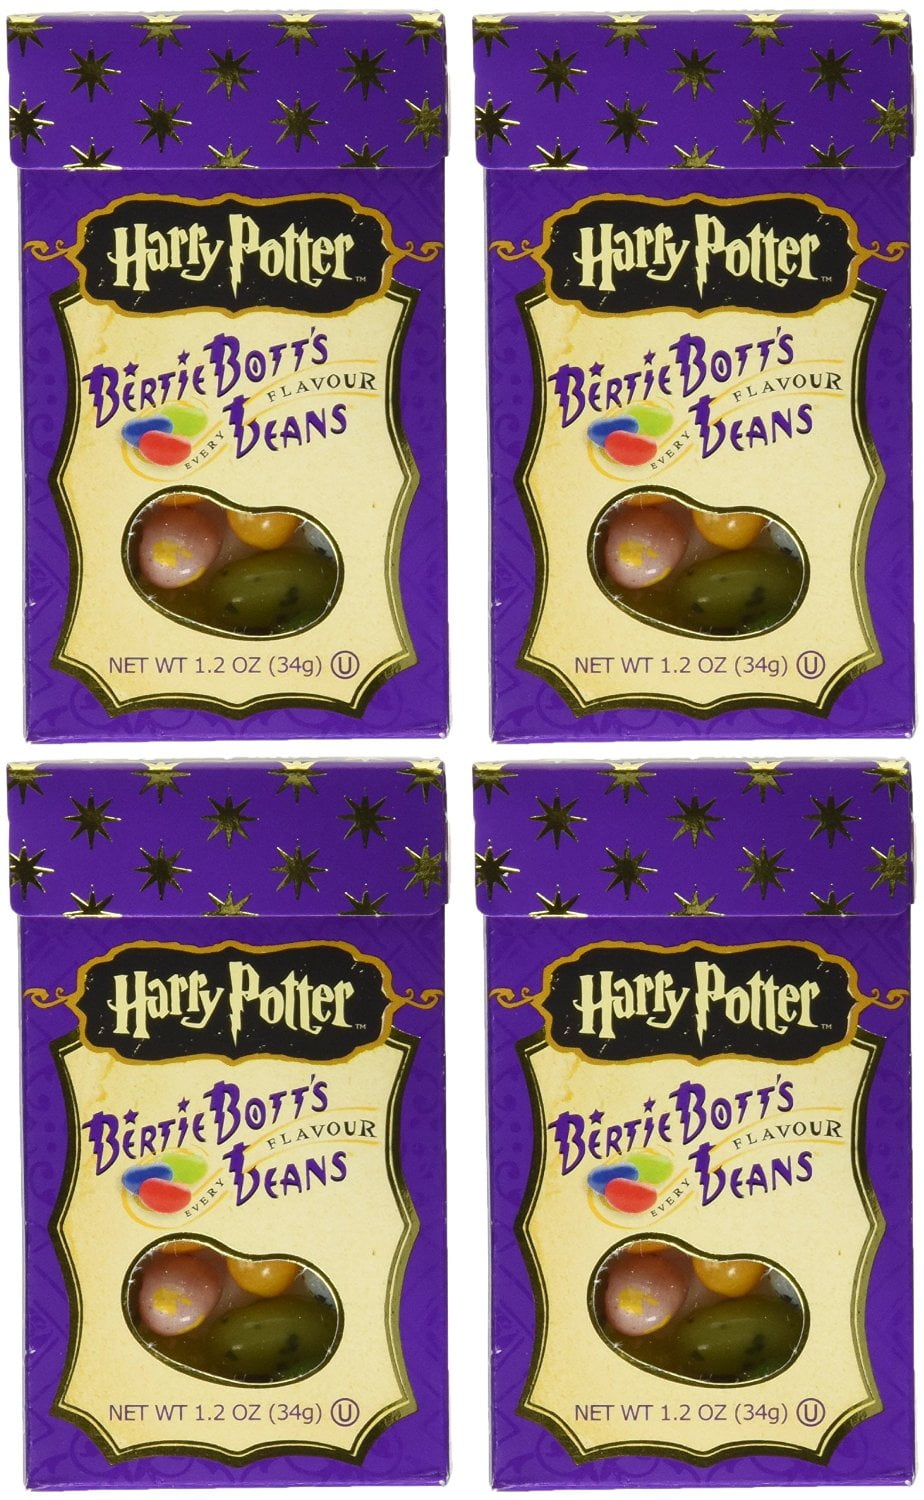 Harry Potter Bertie Botts Every Flavour Beans 54g Bag of Jelly Beans 